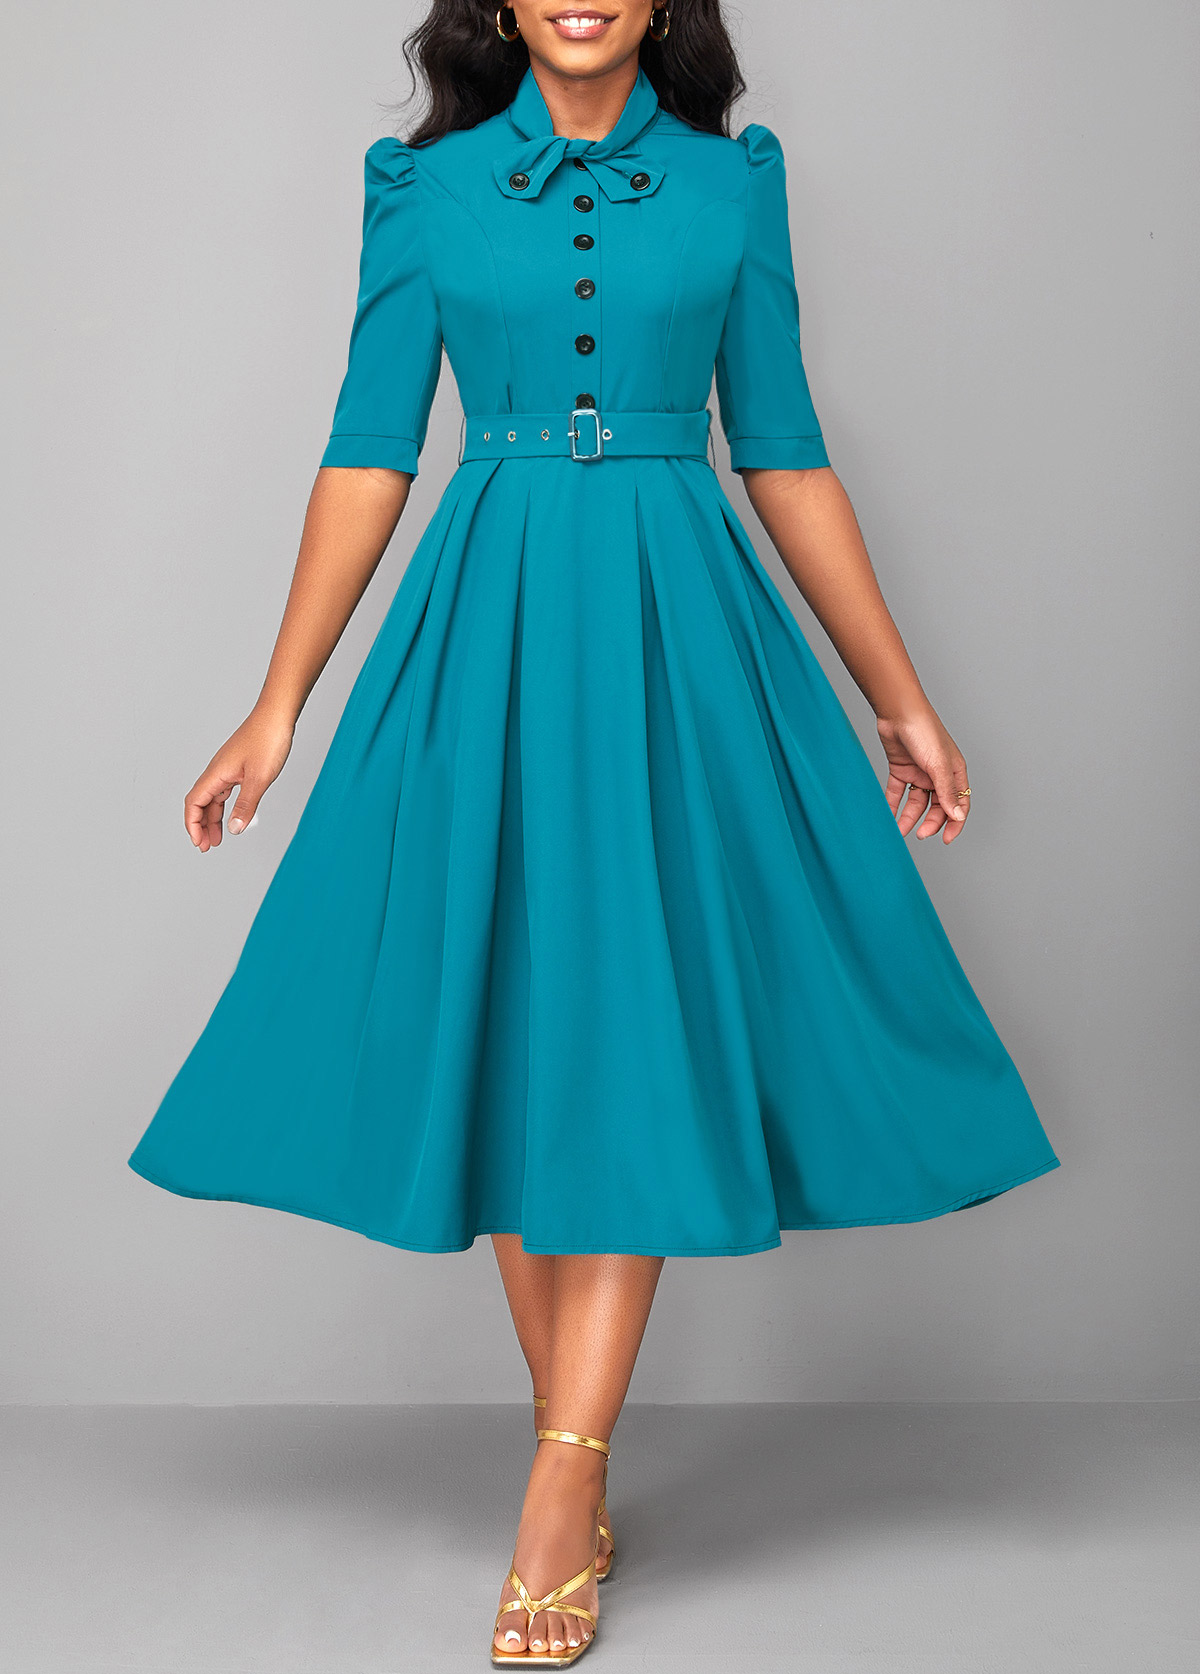 Turquoise Tie Belted Half Sleeve Dress